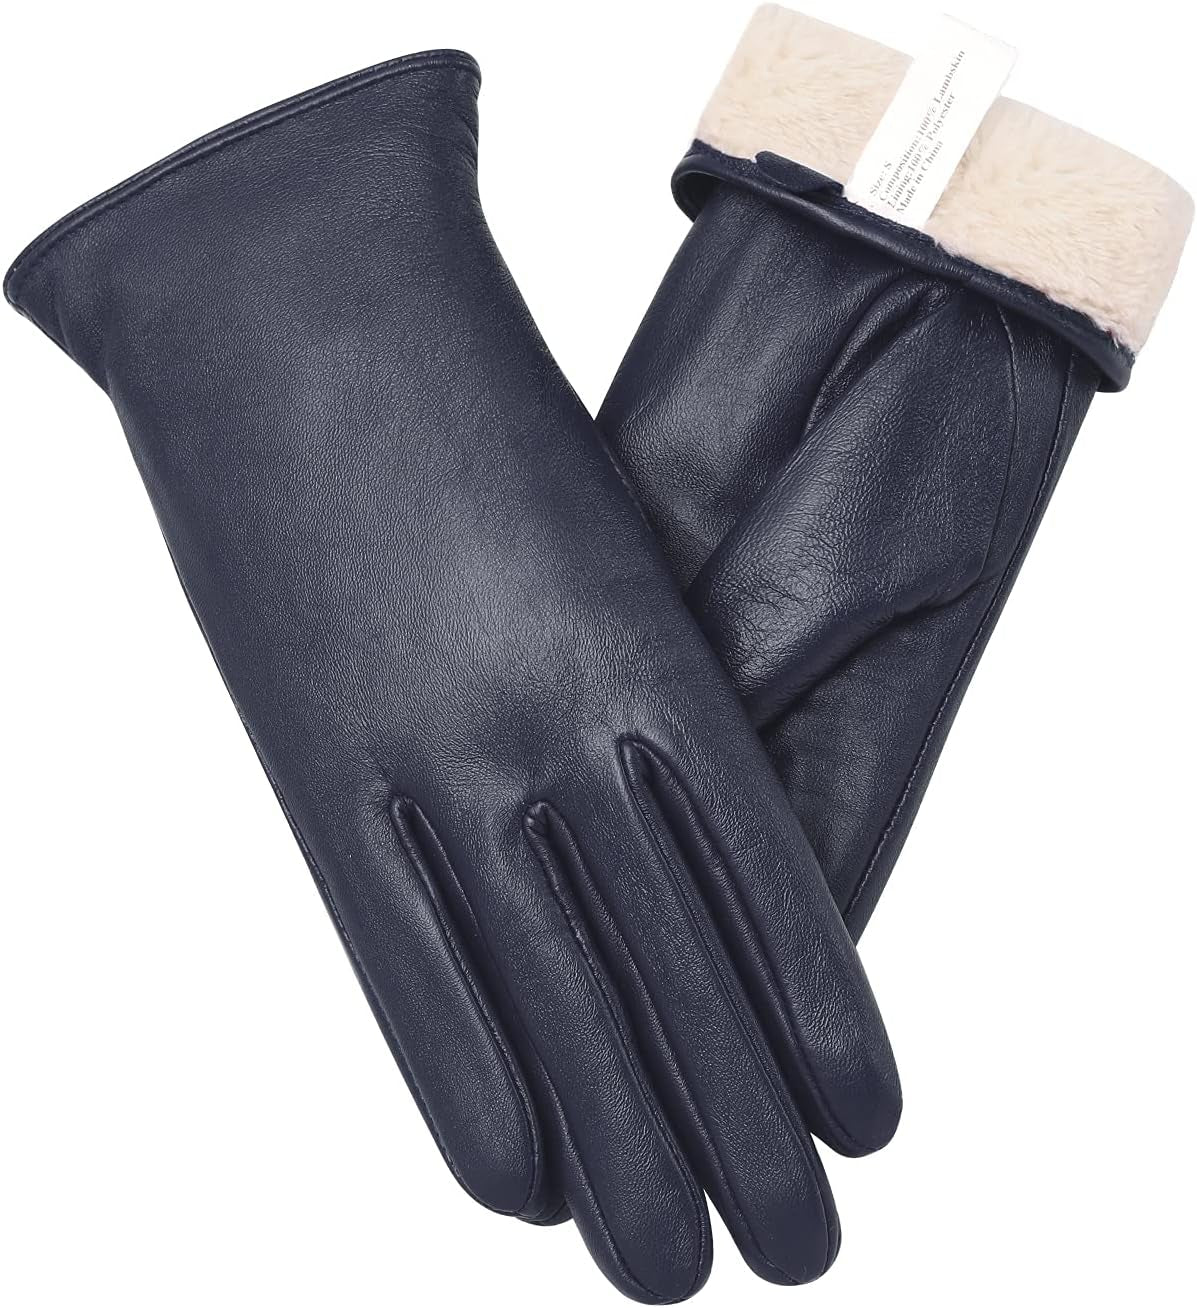 Full-Hand Womens Touch Screen Gloves Genuine Leather Gloves Warm Winter Texting Driving Glove